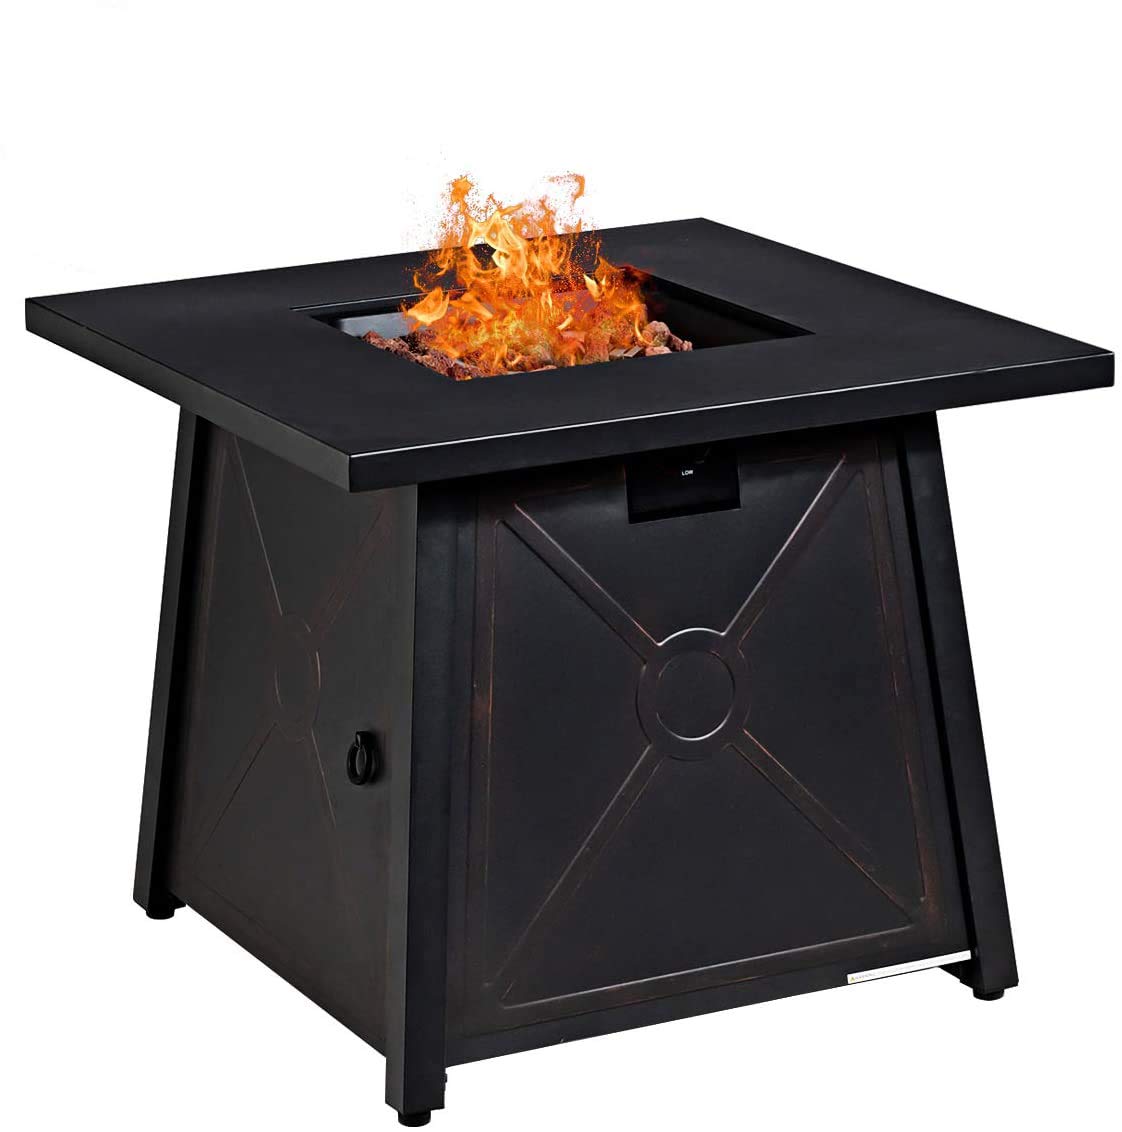 Giantex Gas Fire Table, 30 Inch Square Firepit Table 50,000BTU Fire Pits Tables w/ Waterproof Cover (Black)